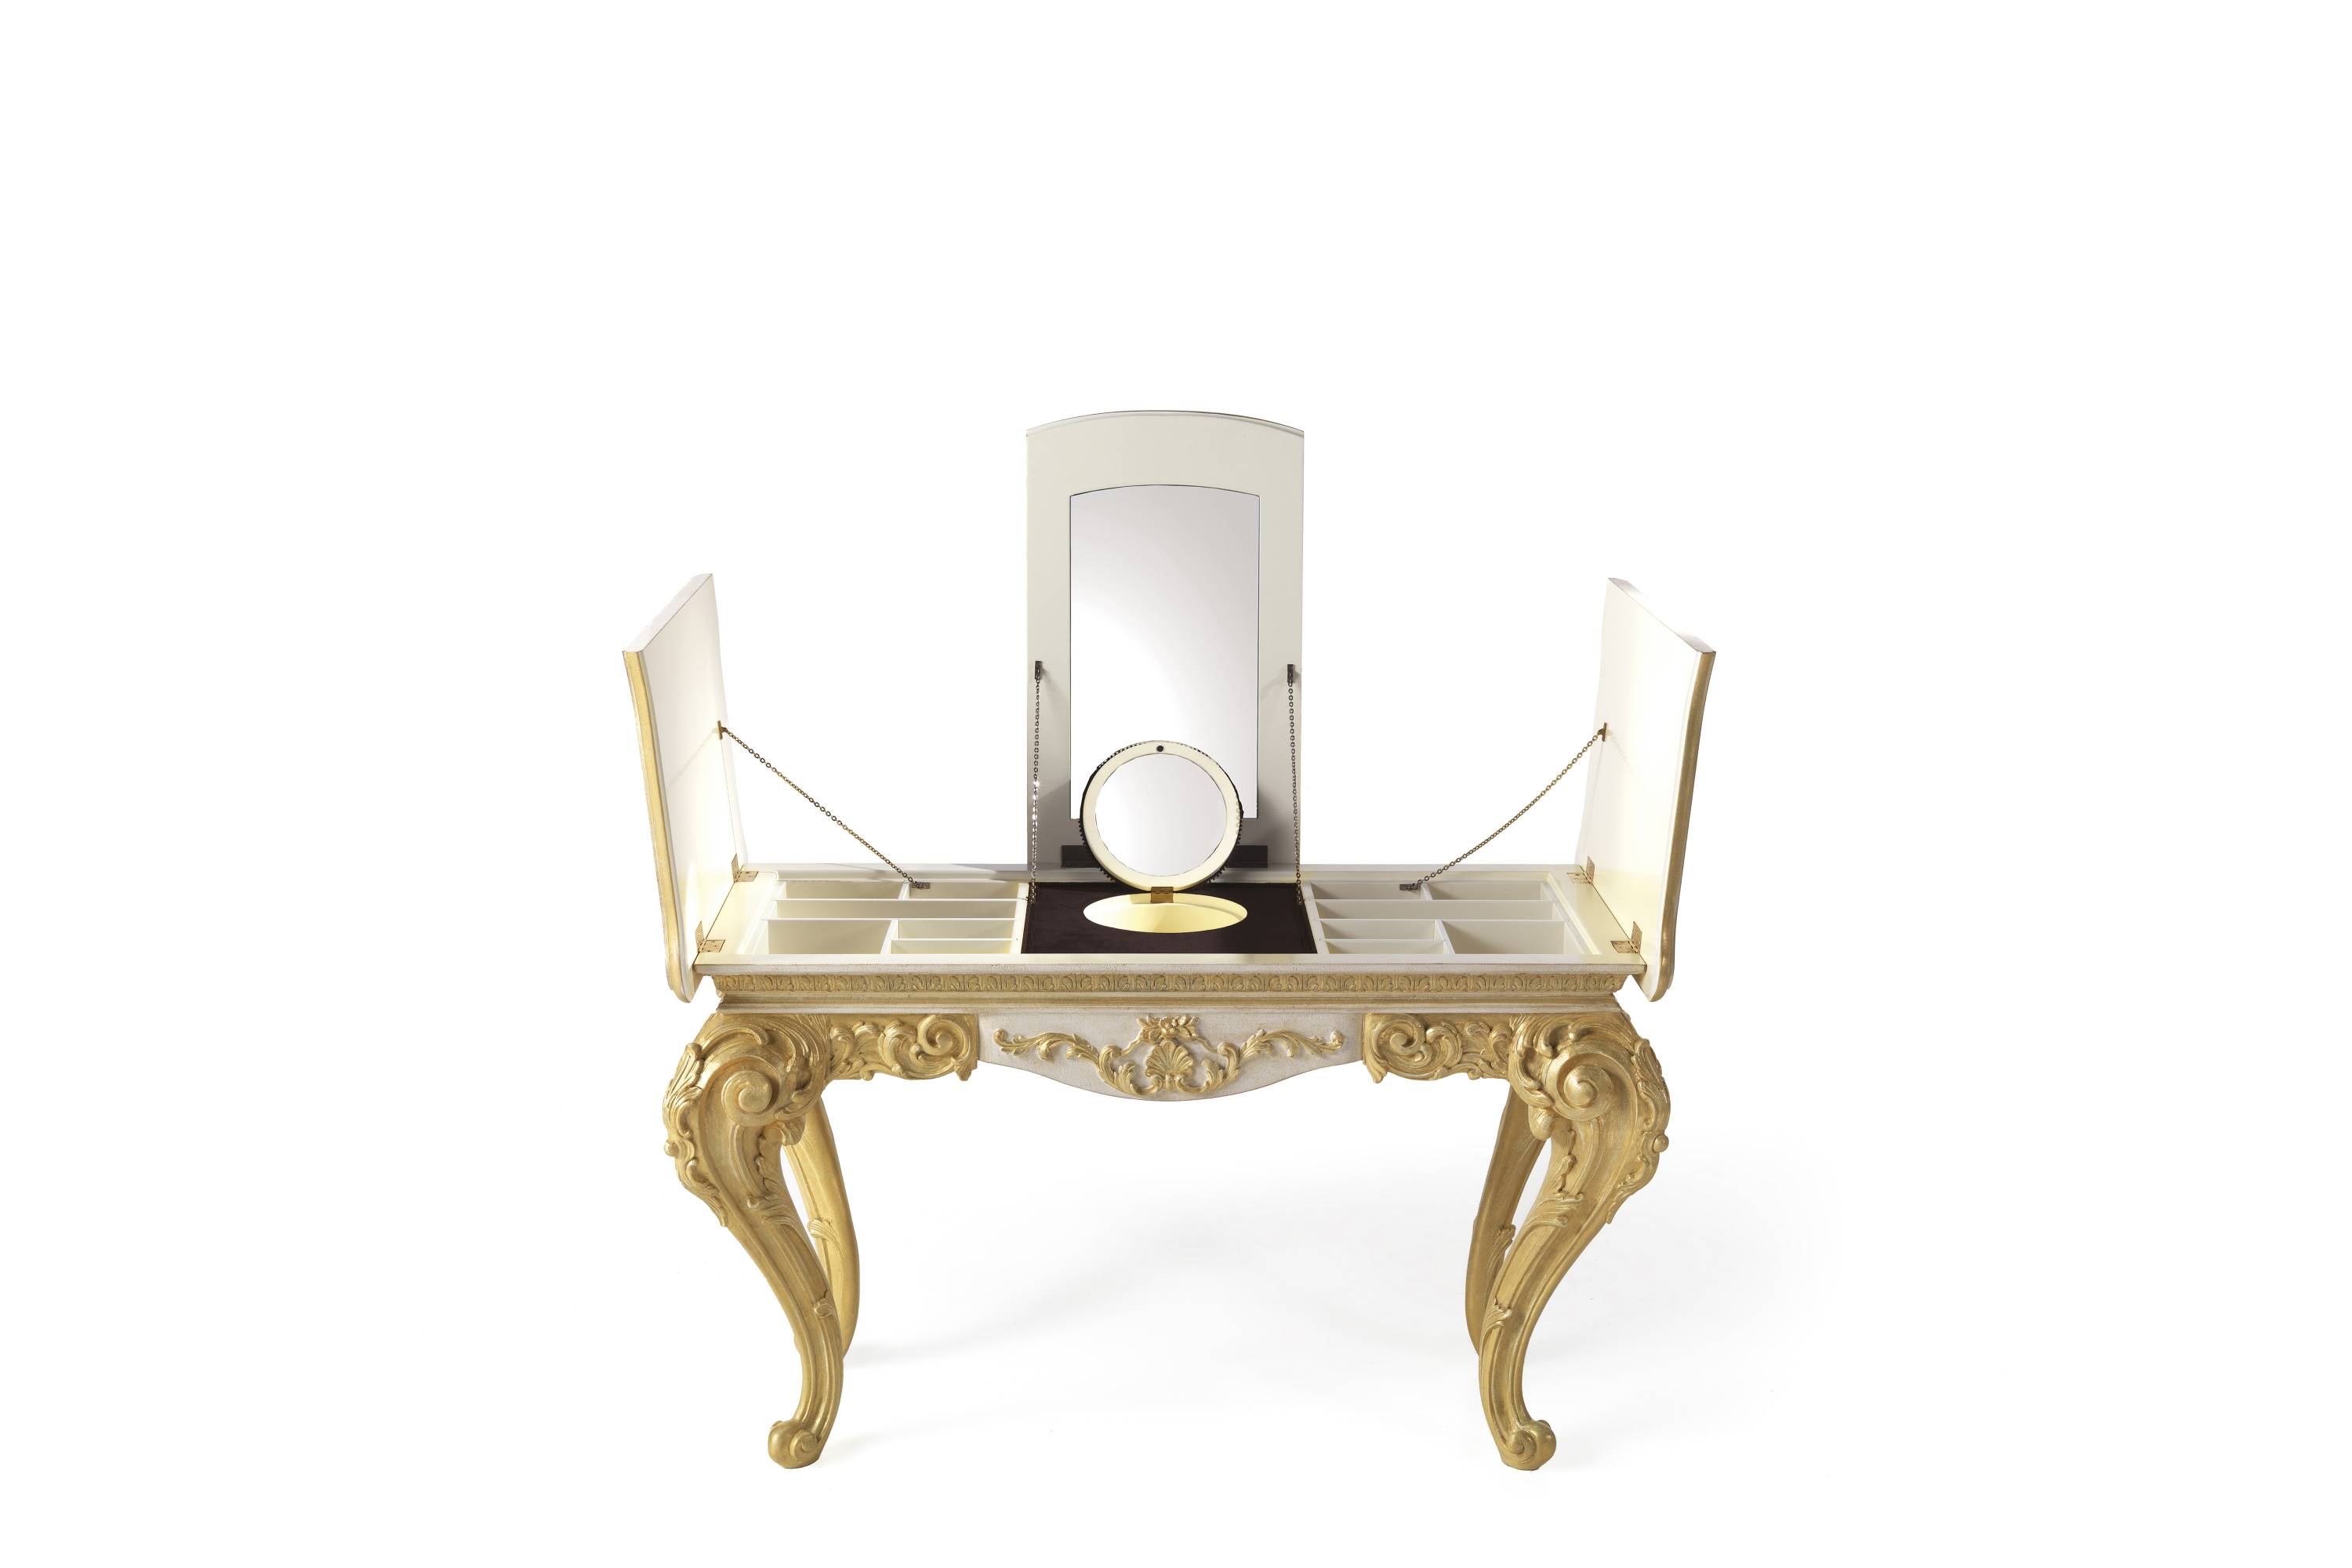 SCARLETT dressing table - A luxury experience with the Domus collection and its classic luxurious furniture